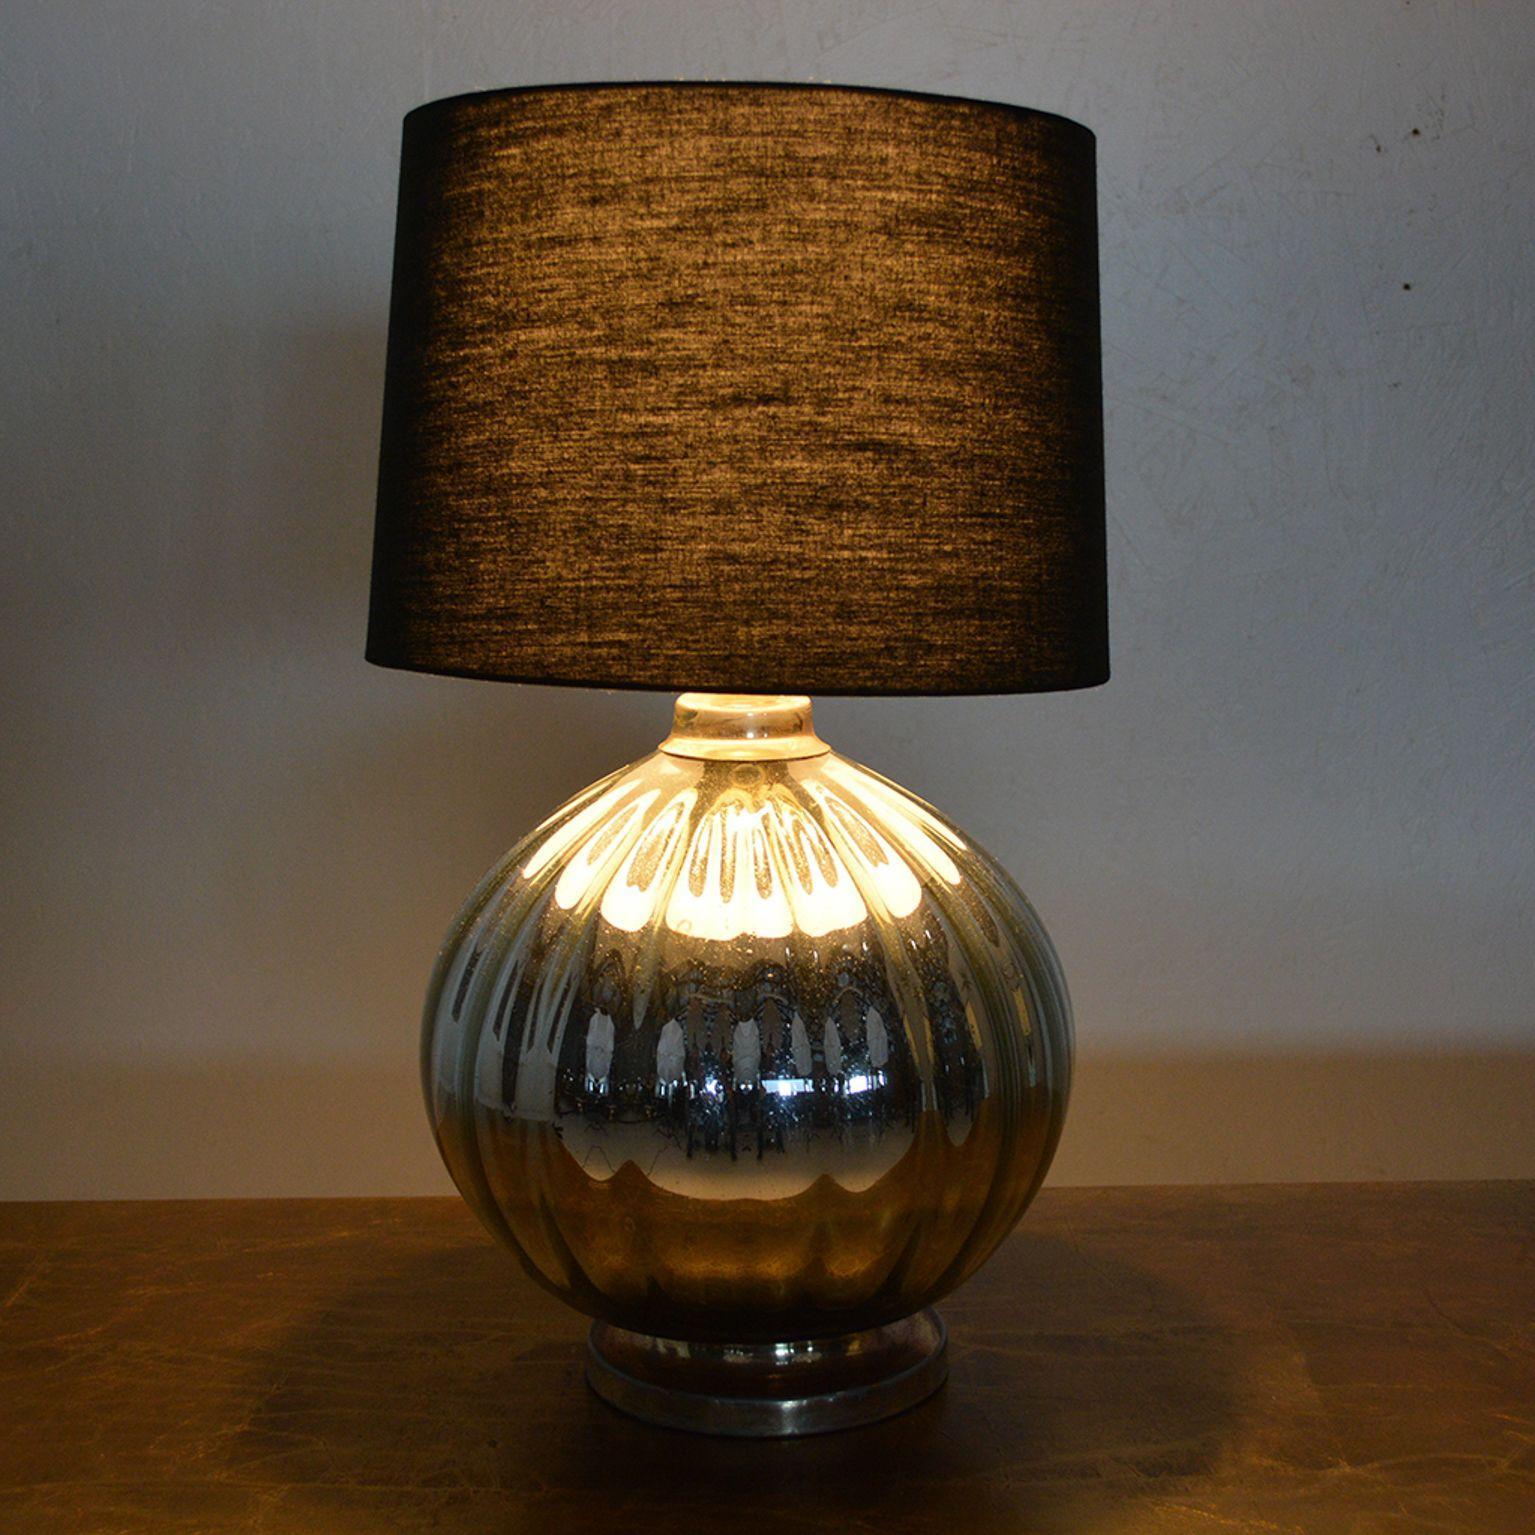 Mid-Century Modern Bulbous Table Lamp Ribbed Mercury Glass 1950s Mexican Modernism Luis Barragan